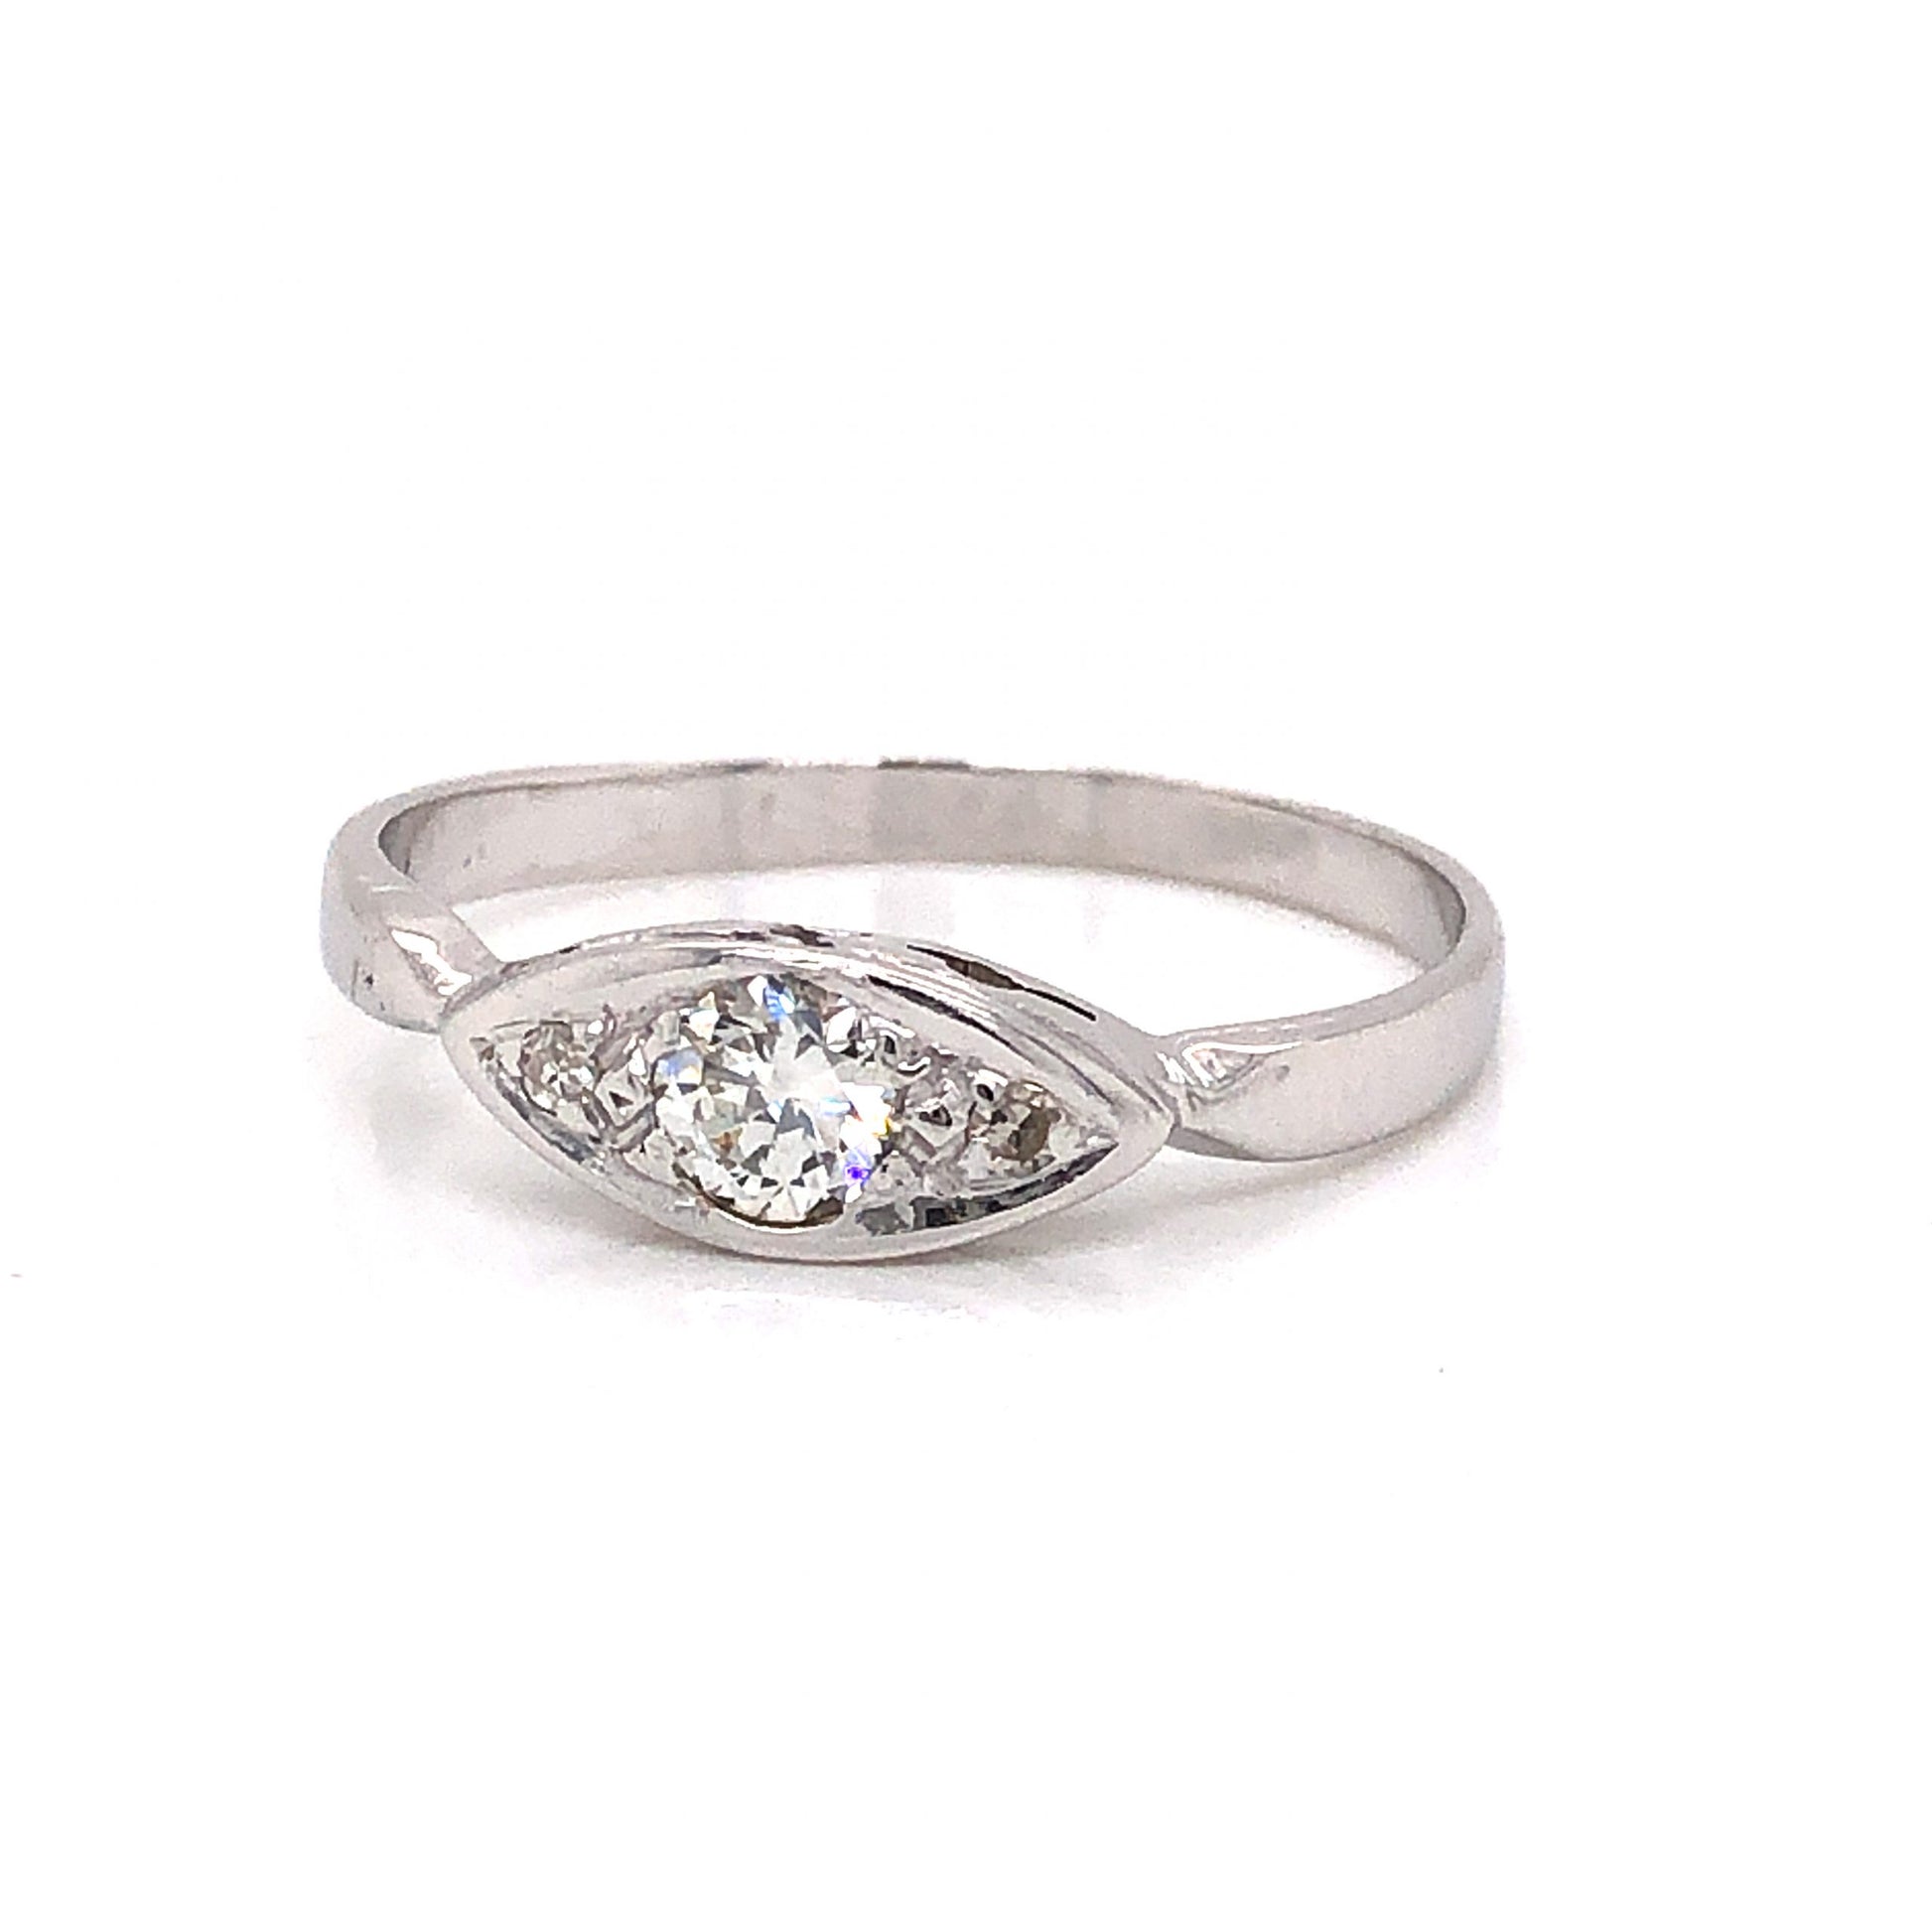 Antique Marquise Shaped Diamond Engagement Ring in 14k White GoldComposition: Platinum Ring Size: 7.25 Total Diamond Weight: .28ct Total Gram Weight: 2.0 g